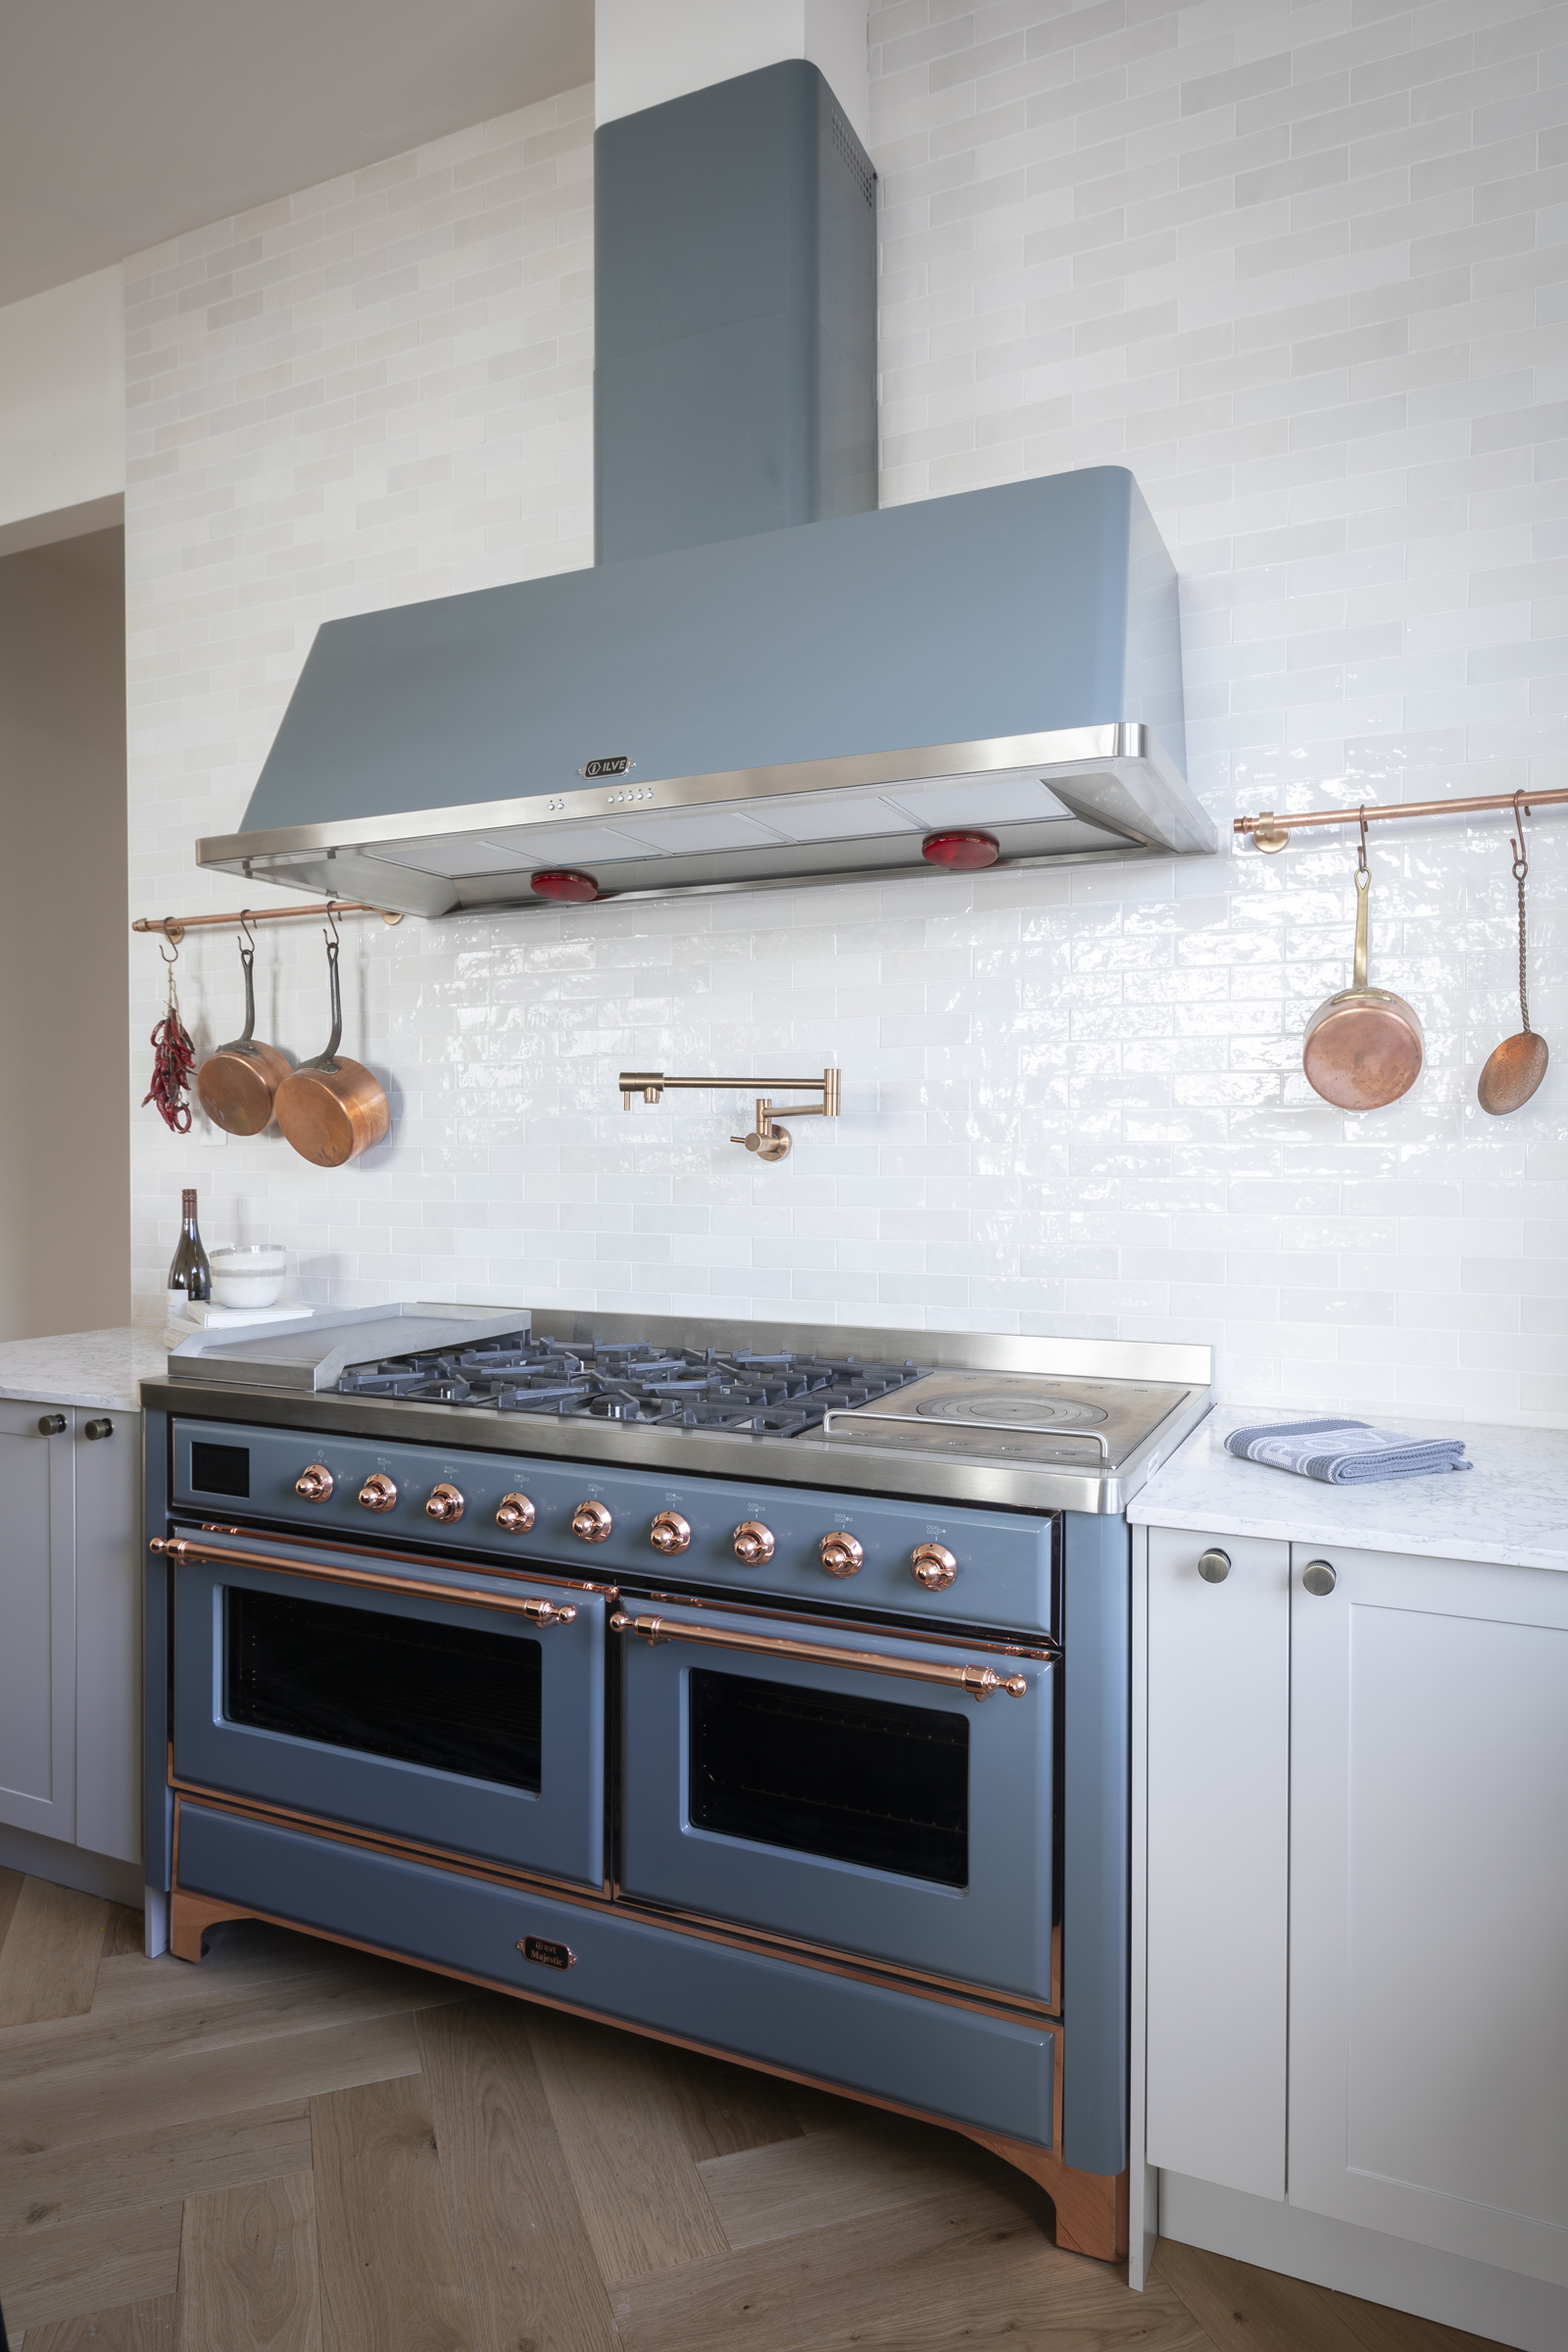 Ranges, Customizable Cooking Appliances for your Kitchen